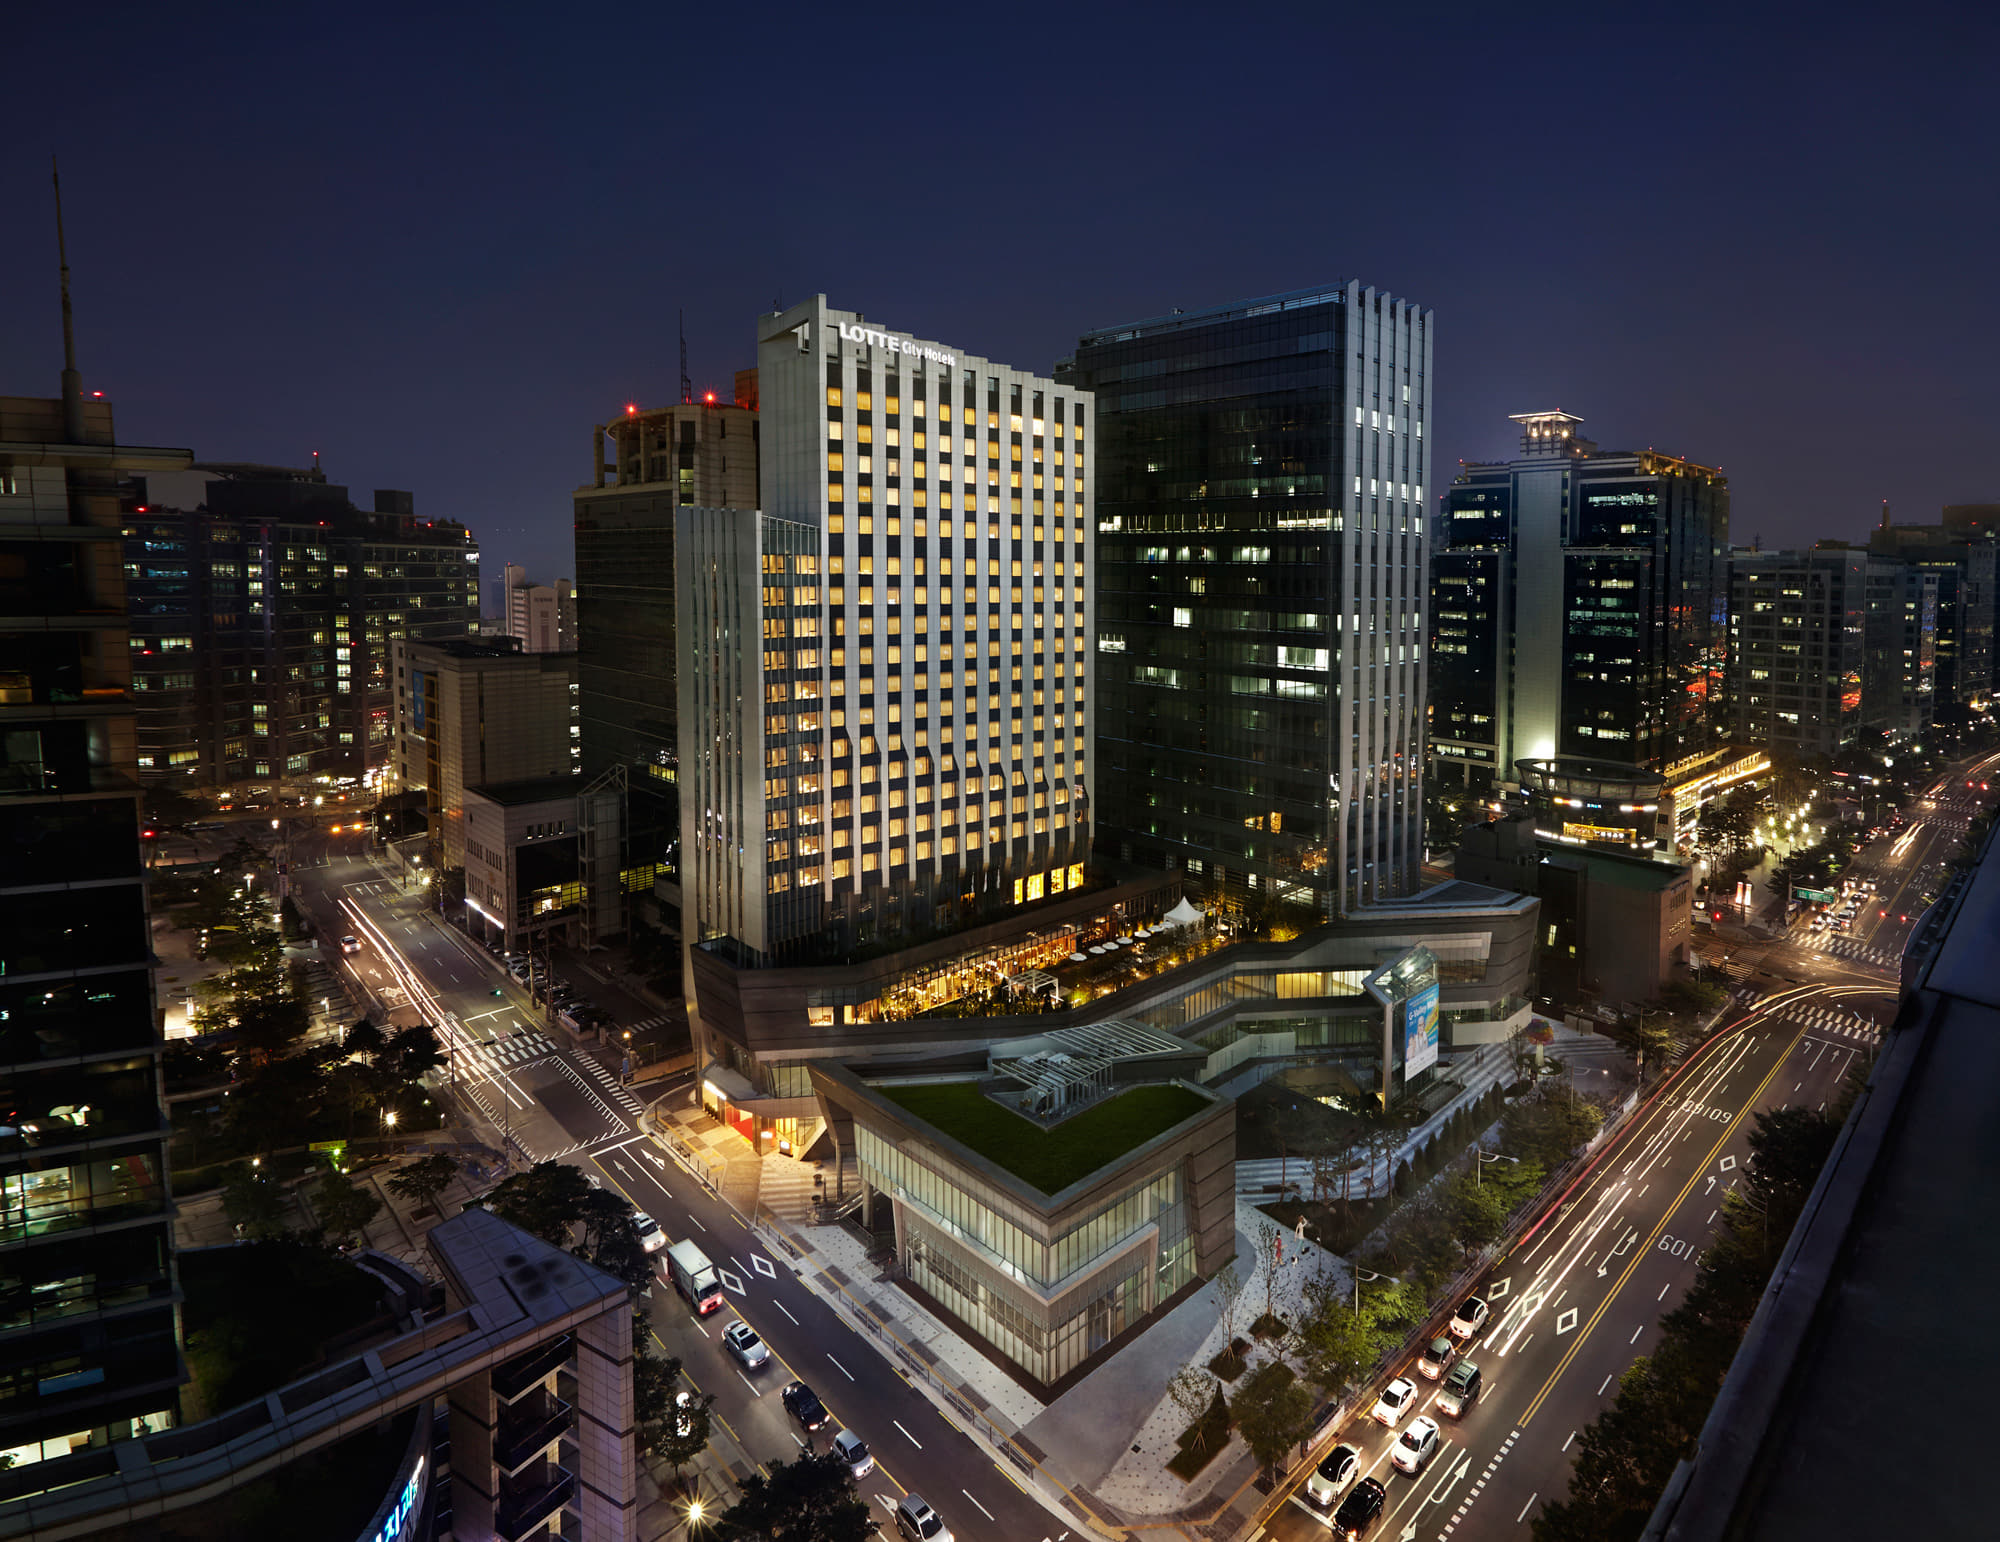 LOTTE City Hotel Guro0 : The night view of the Lotte City Hotel Guro